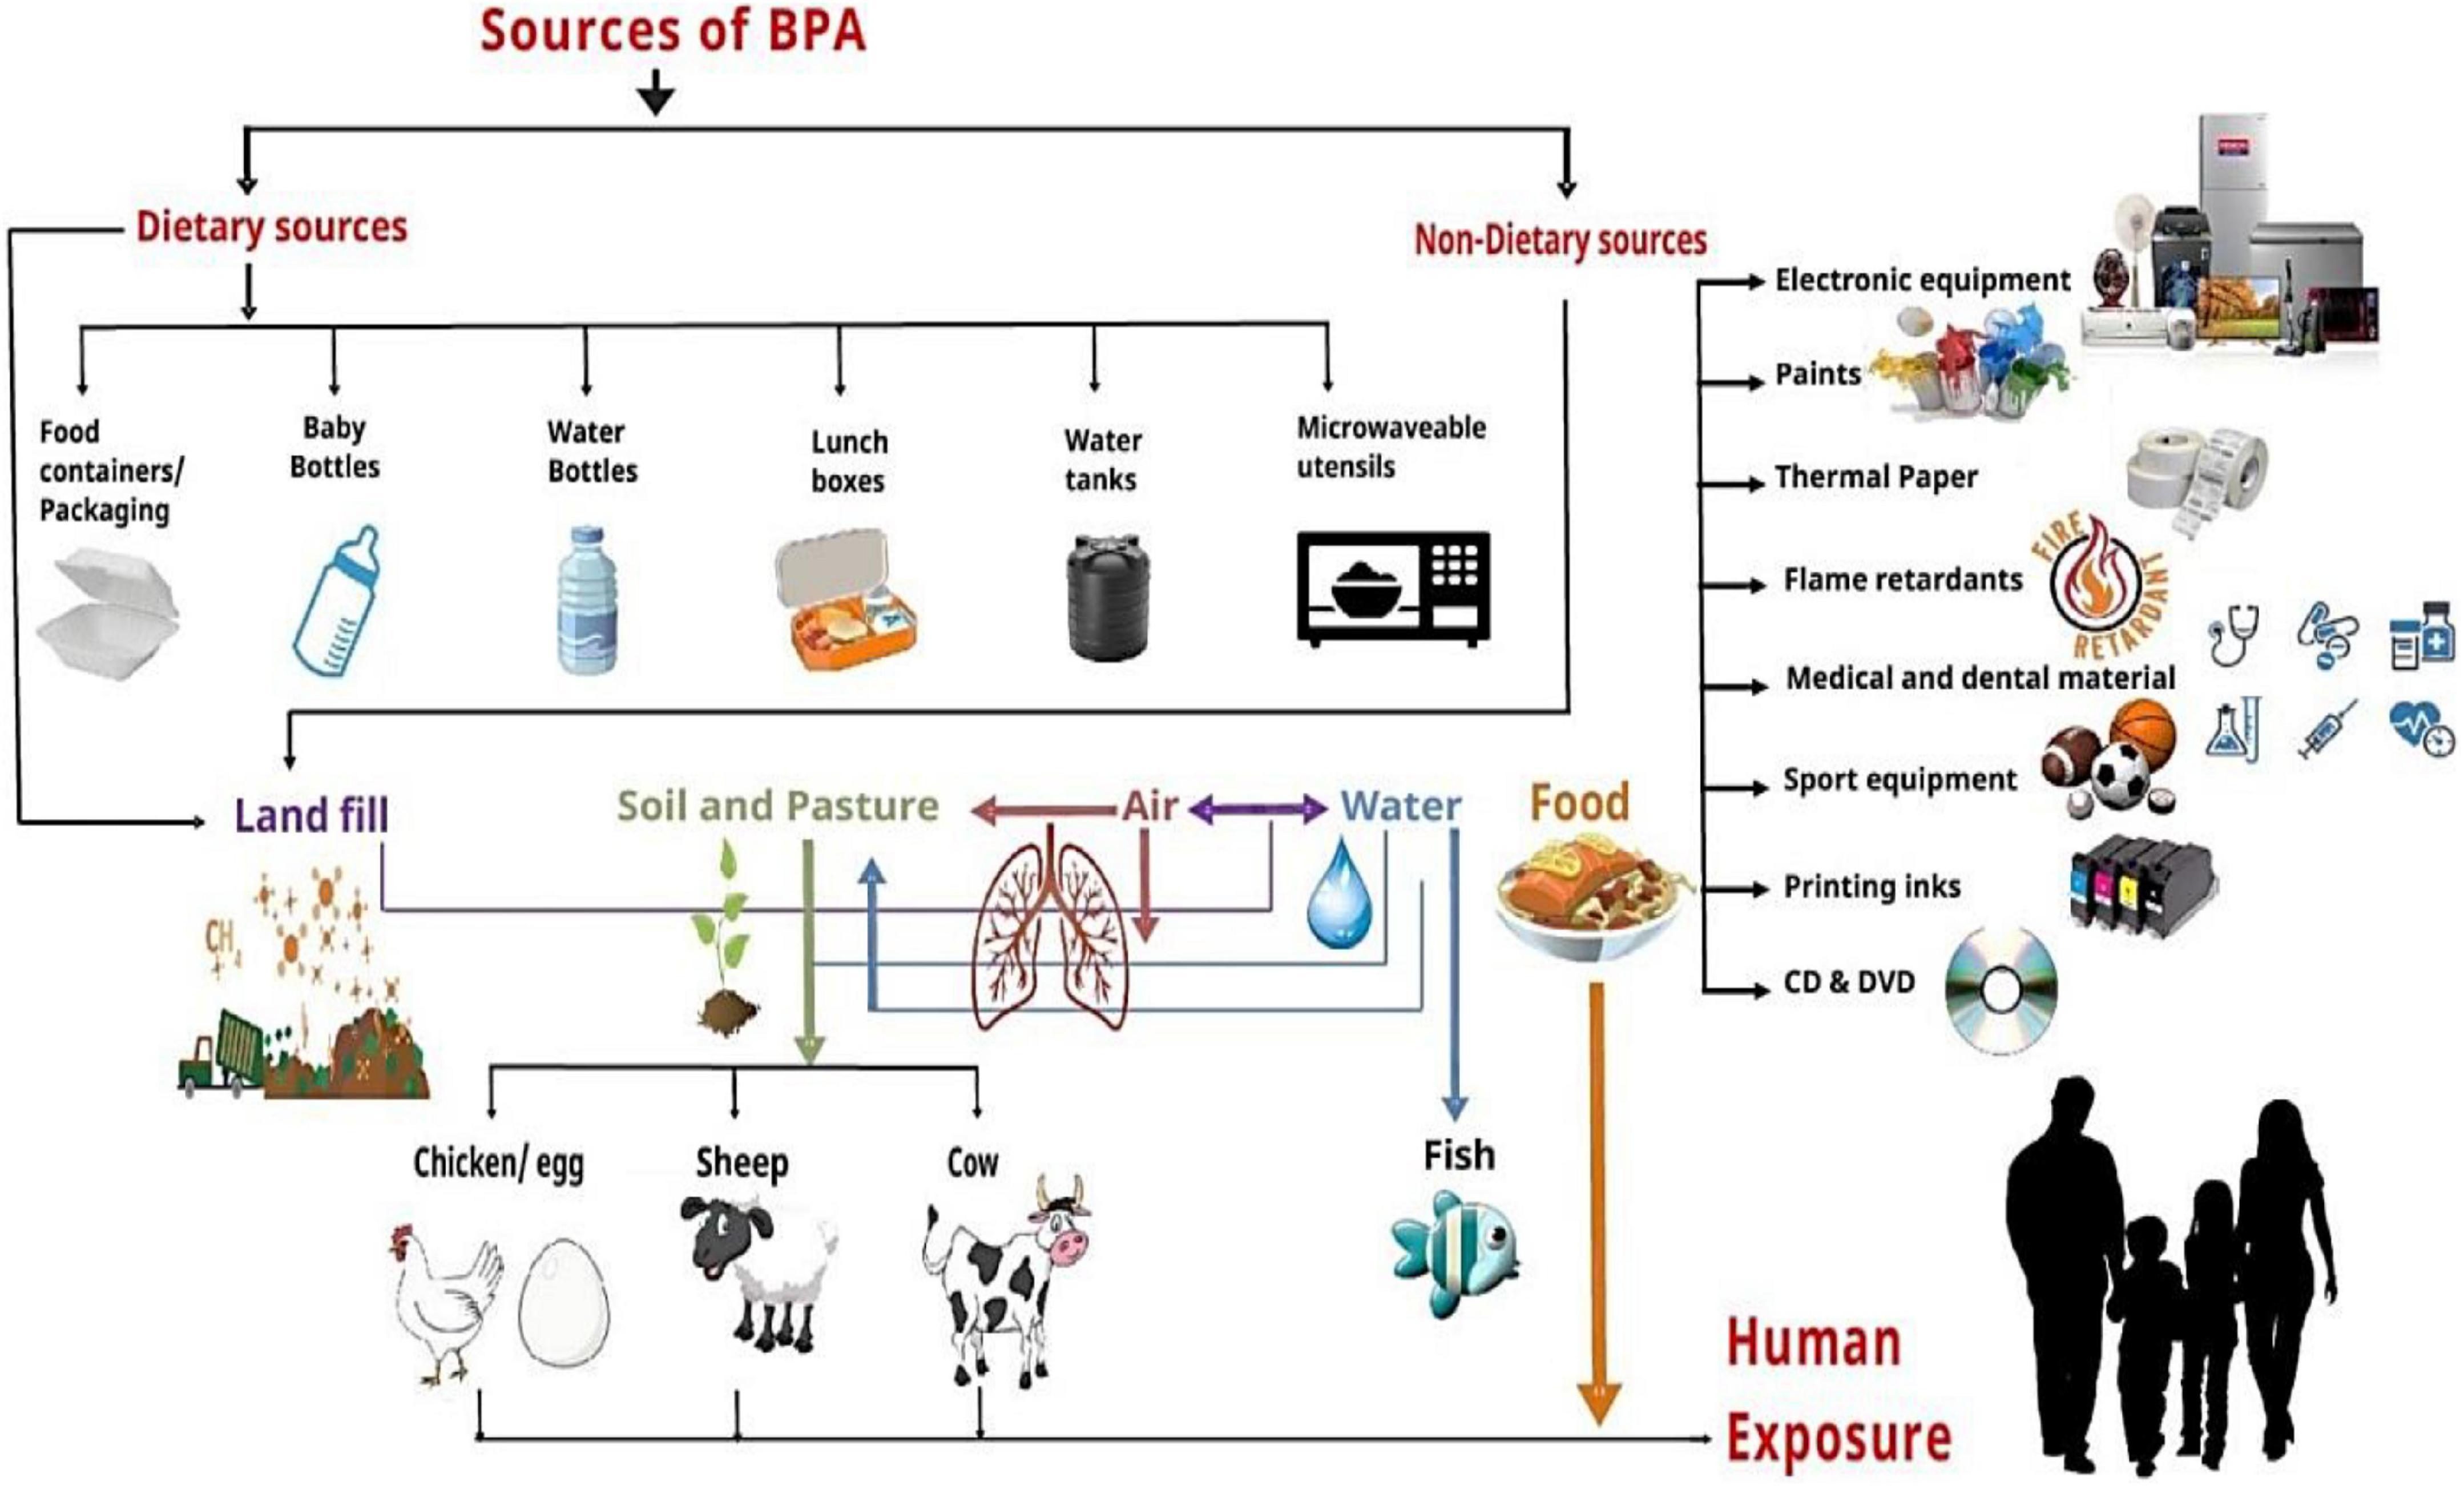 How to Choose Safe BPA Free Plastics to Reduce Your Exposure